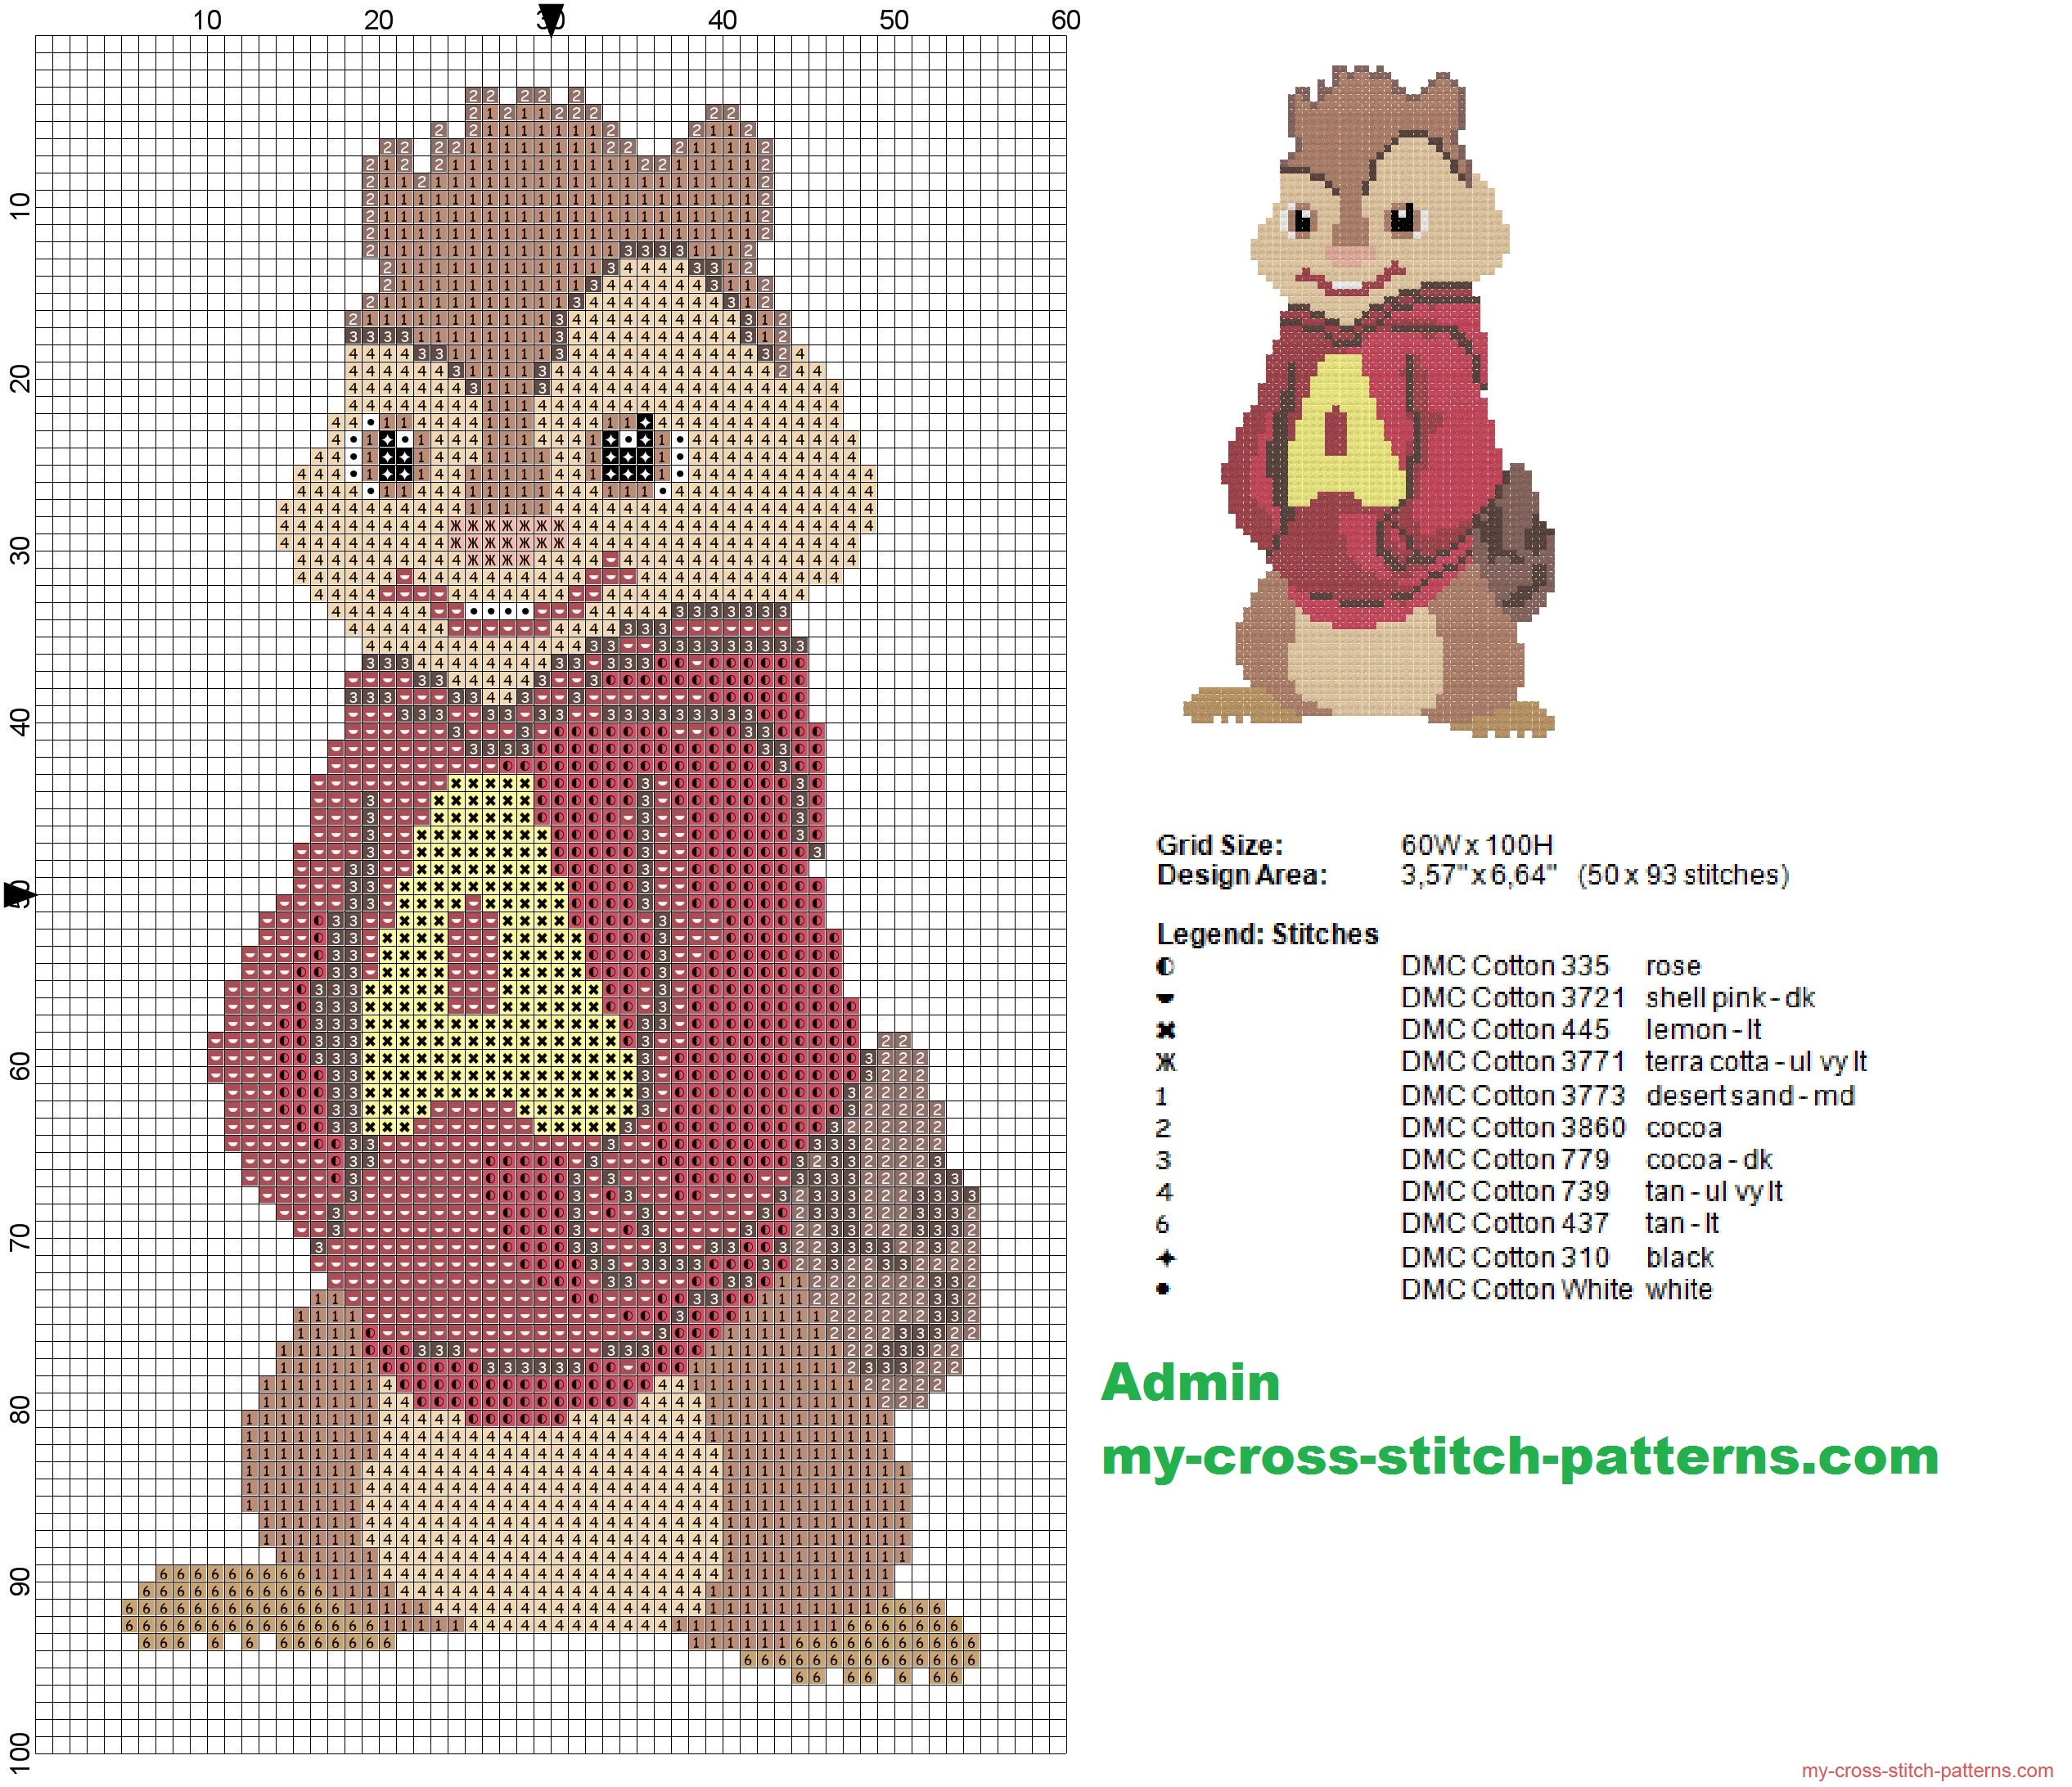 alvin_from_alvin_and_the_chipmunks_cross_stitch_pattern